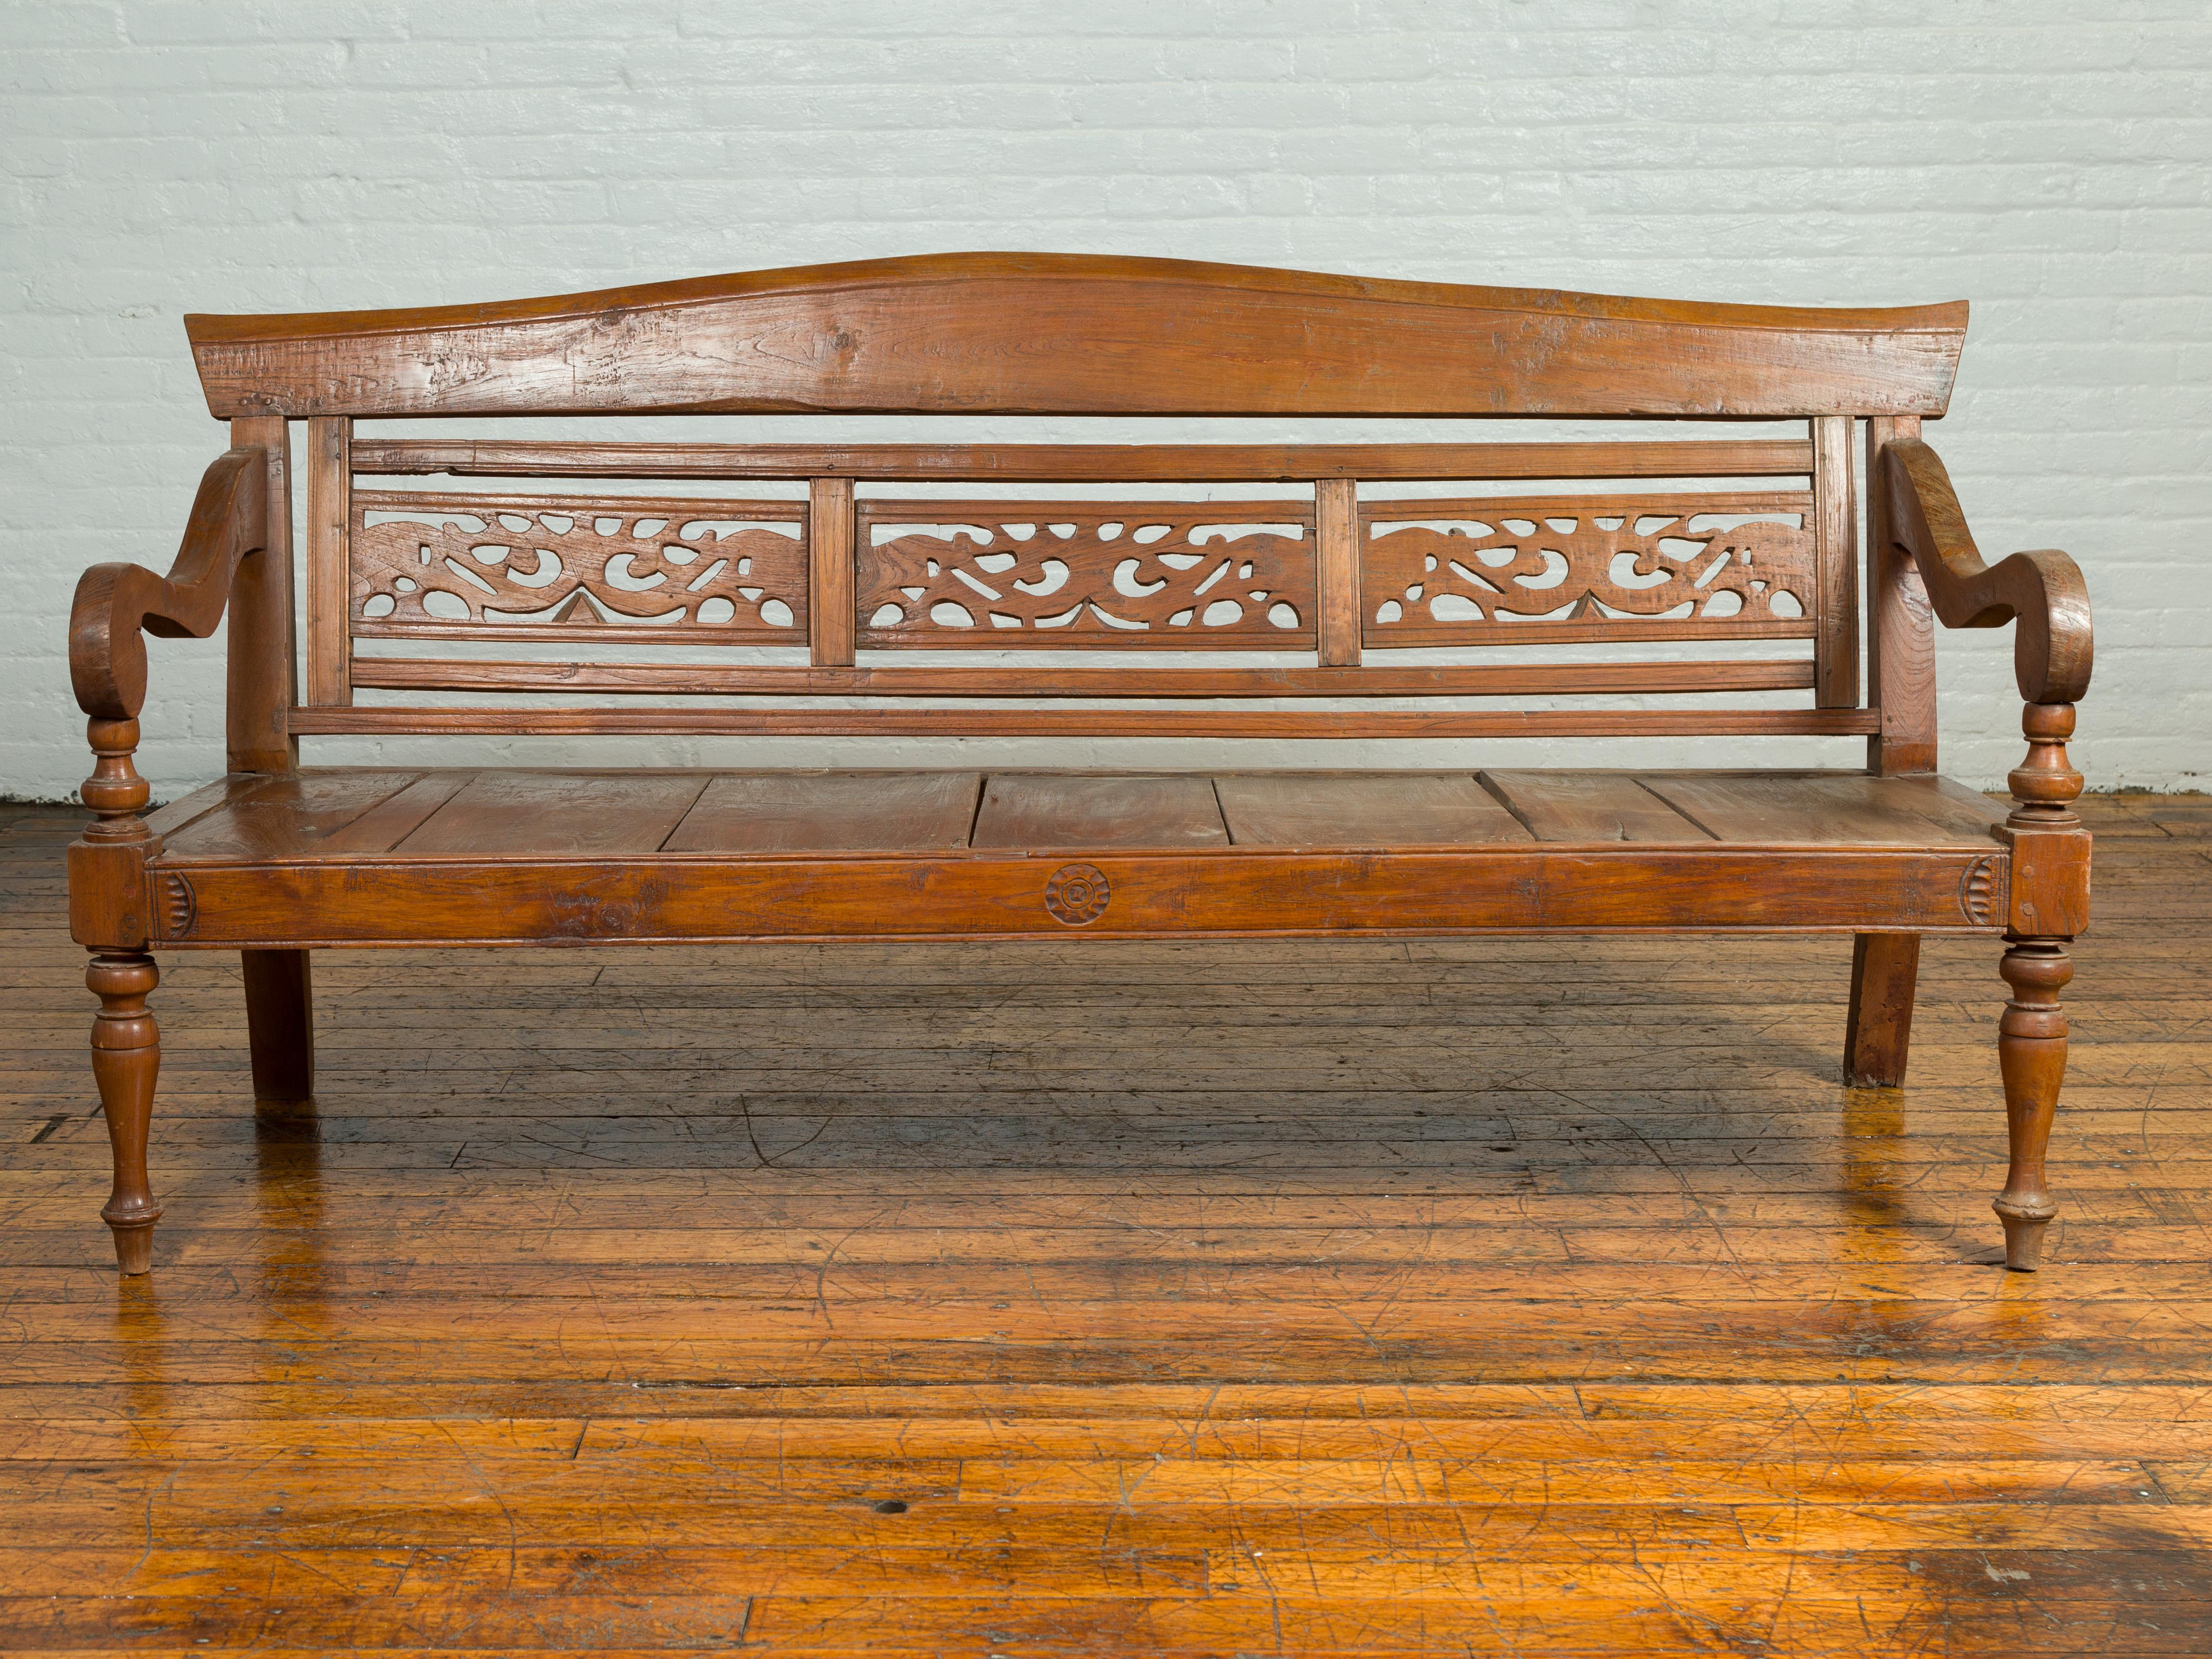 An antique Dutch Colonial Indonesian wooden bench from the early 20th century, with carved back and voluted arms. Born in Indonesia during the early years of the 20th century, this Dutch Colonial bench features a slightly slanted camelback, adorned